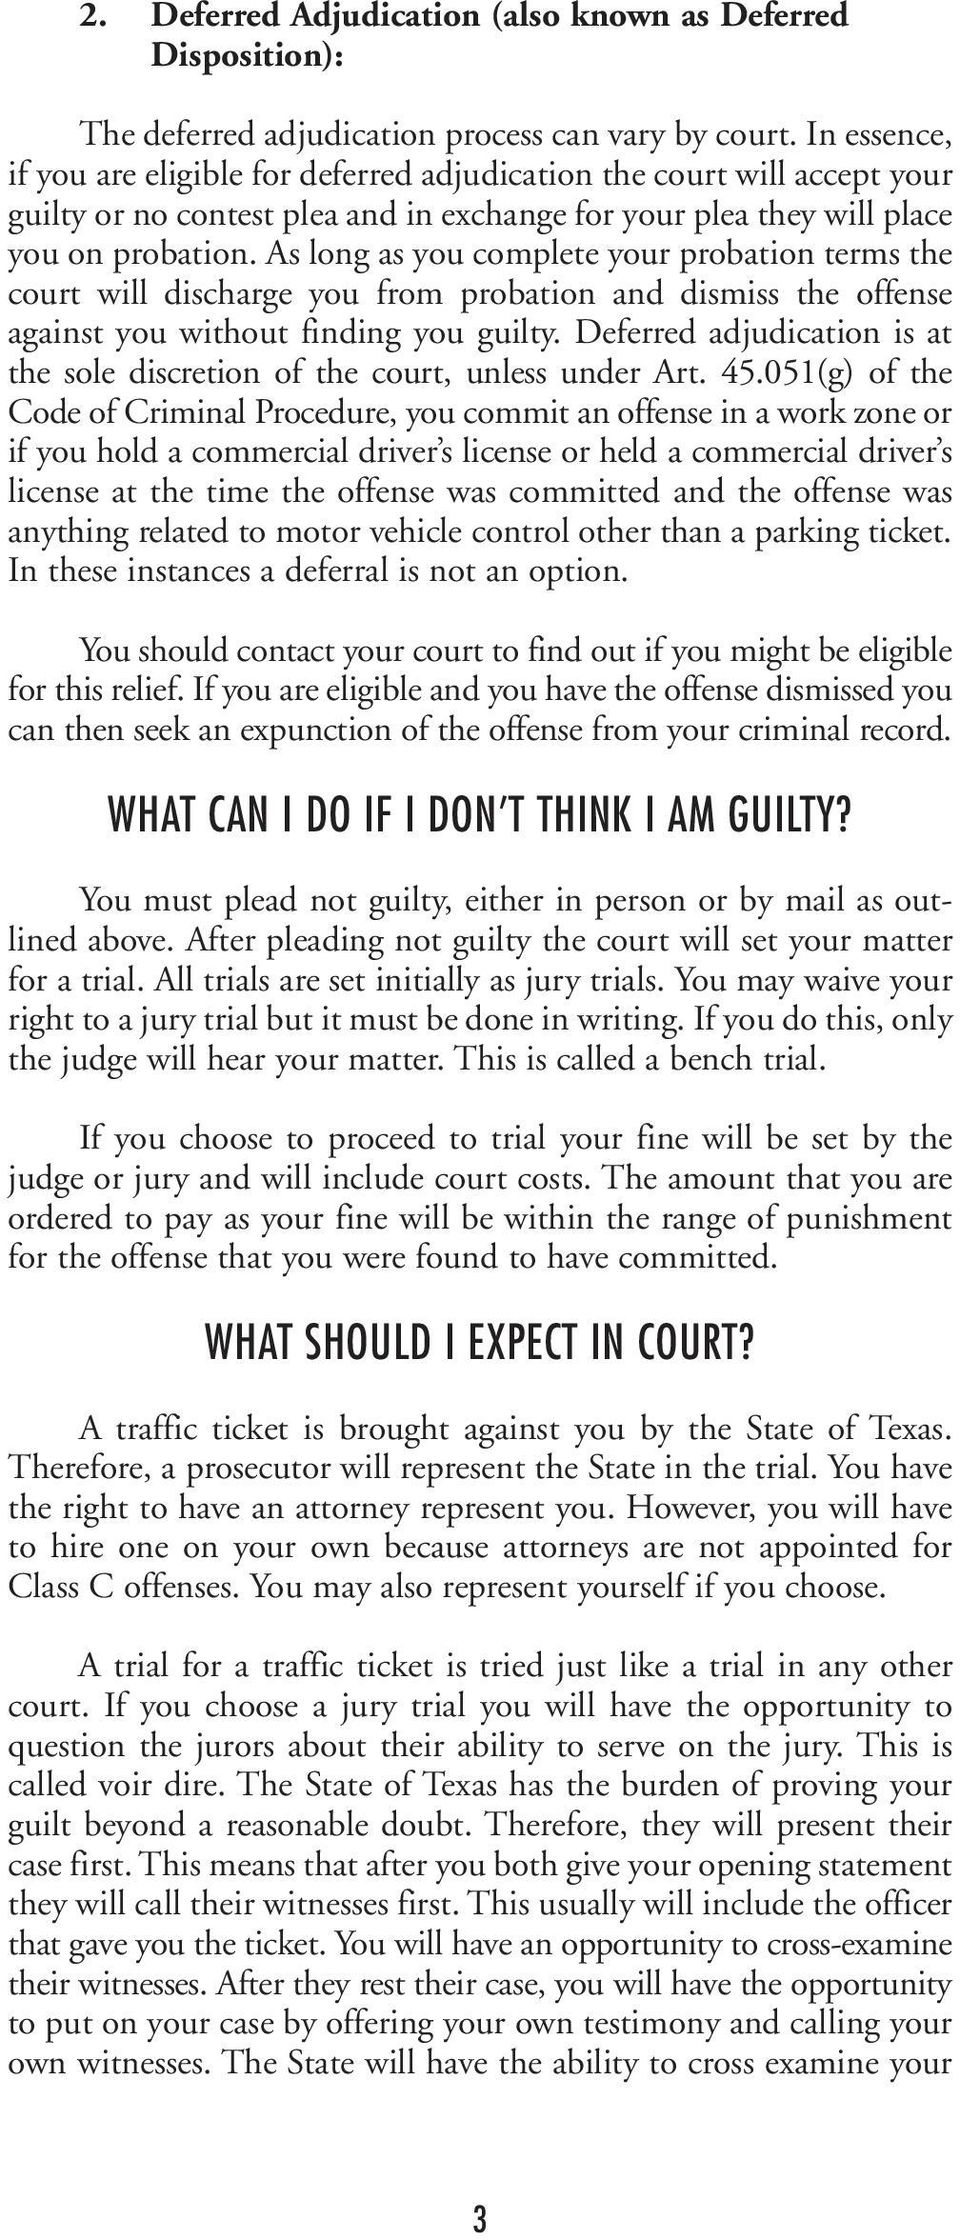 As long as you complete your probation terms the court will discharge you from probation and dismiss the offense against you without finding you guilty.